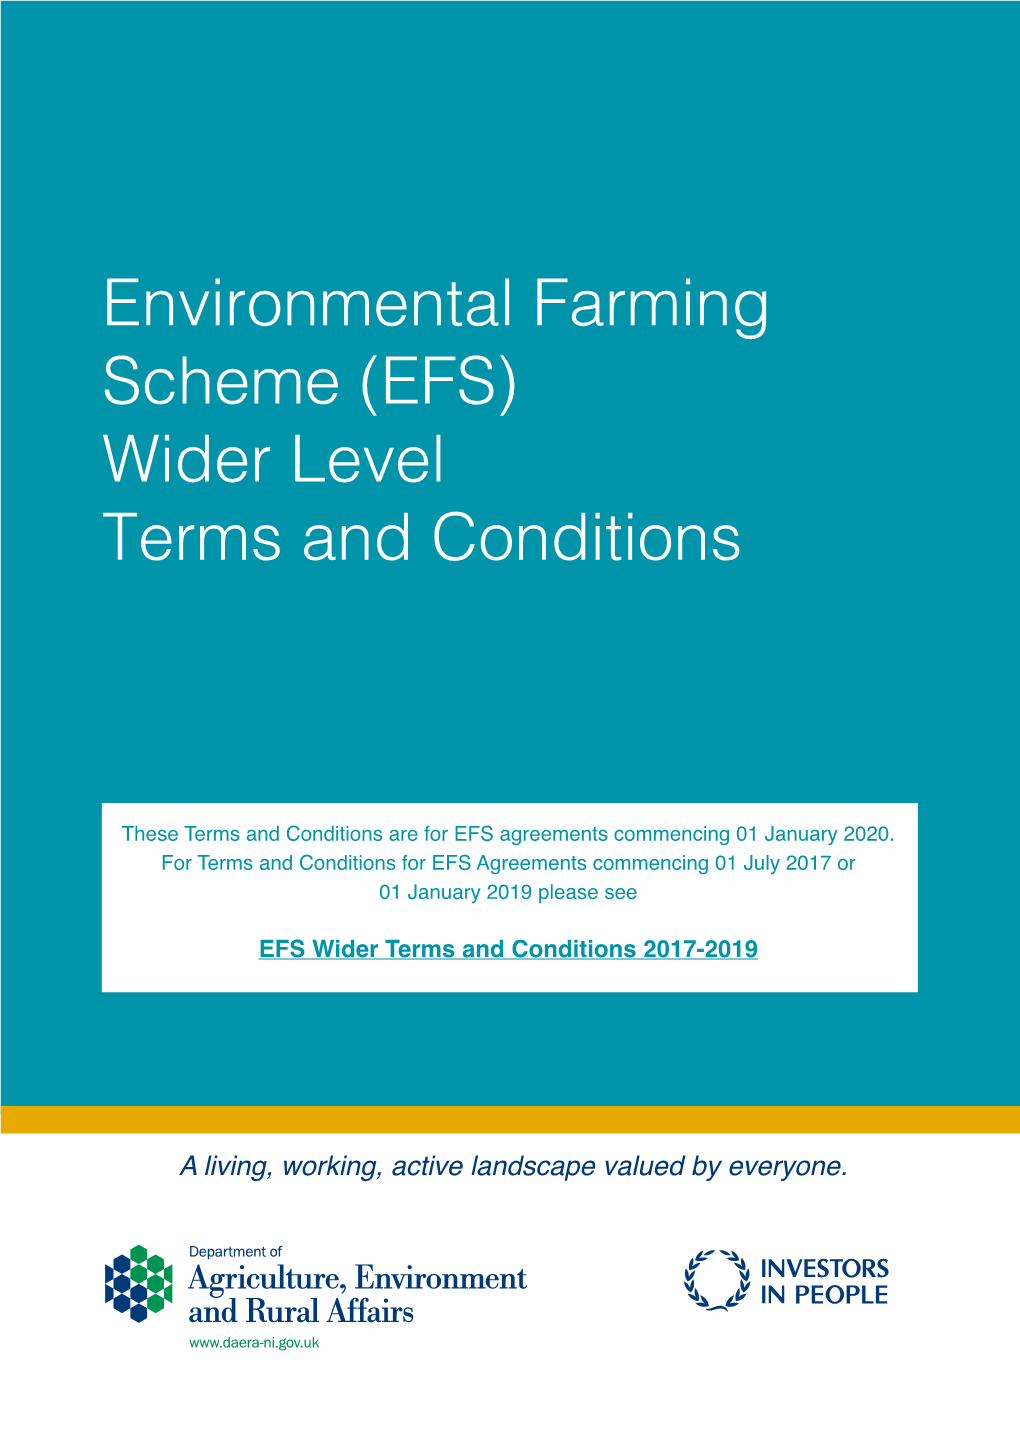 Environmental Farming Scheme (EFS) Wider Level Terms and Conditions